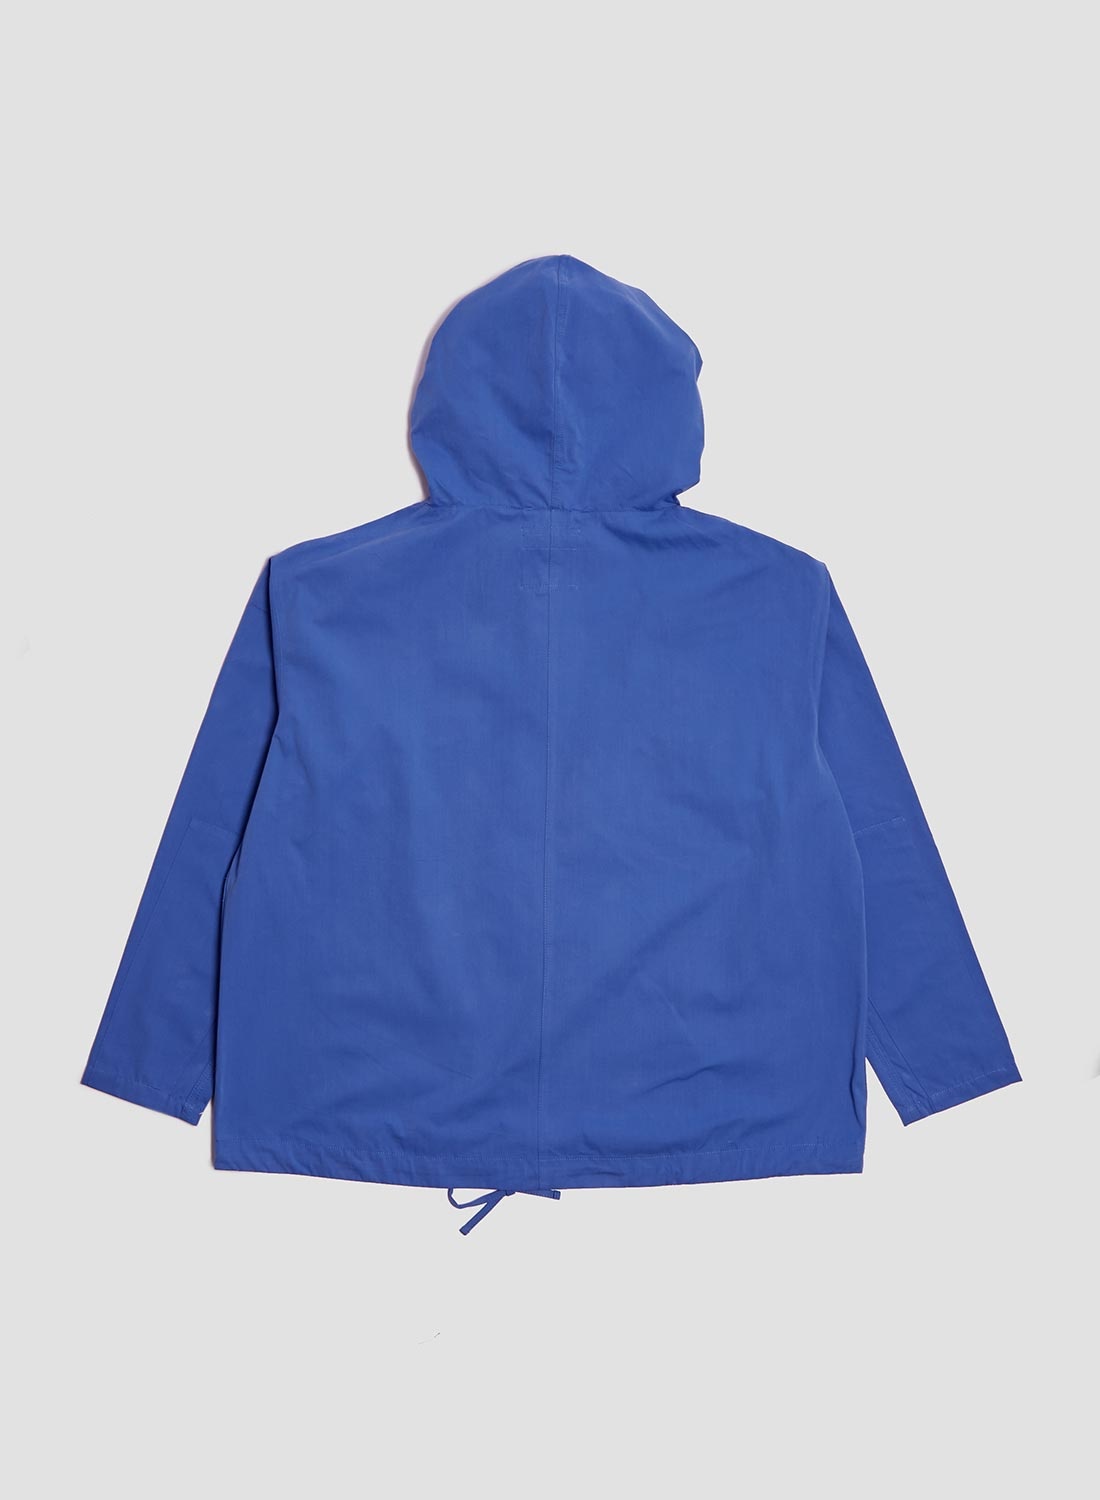 British Army Smock In Blue - 4